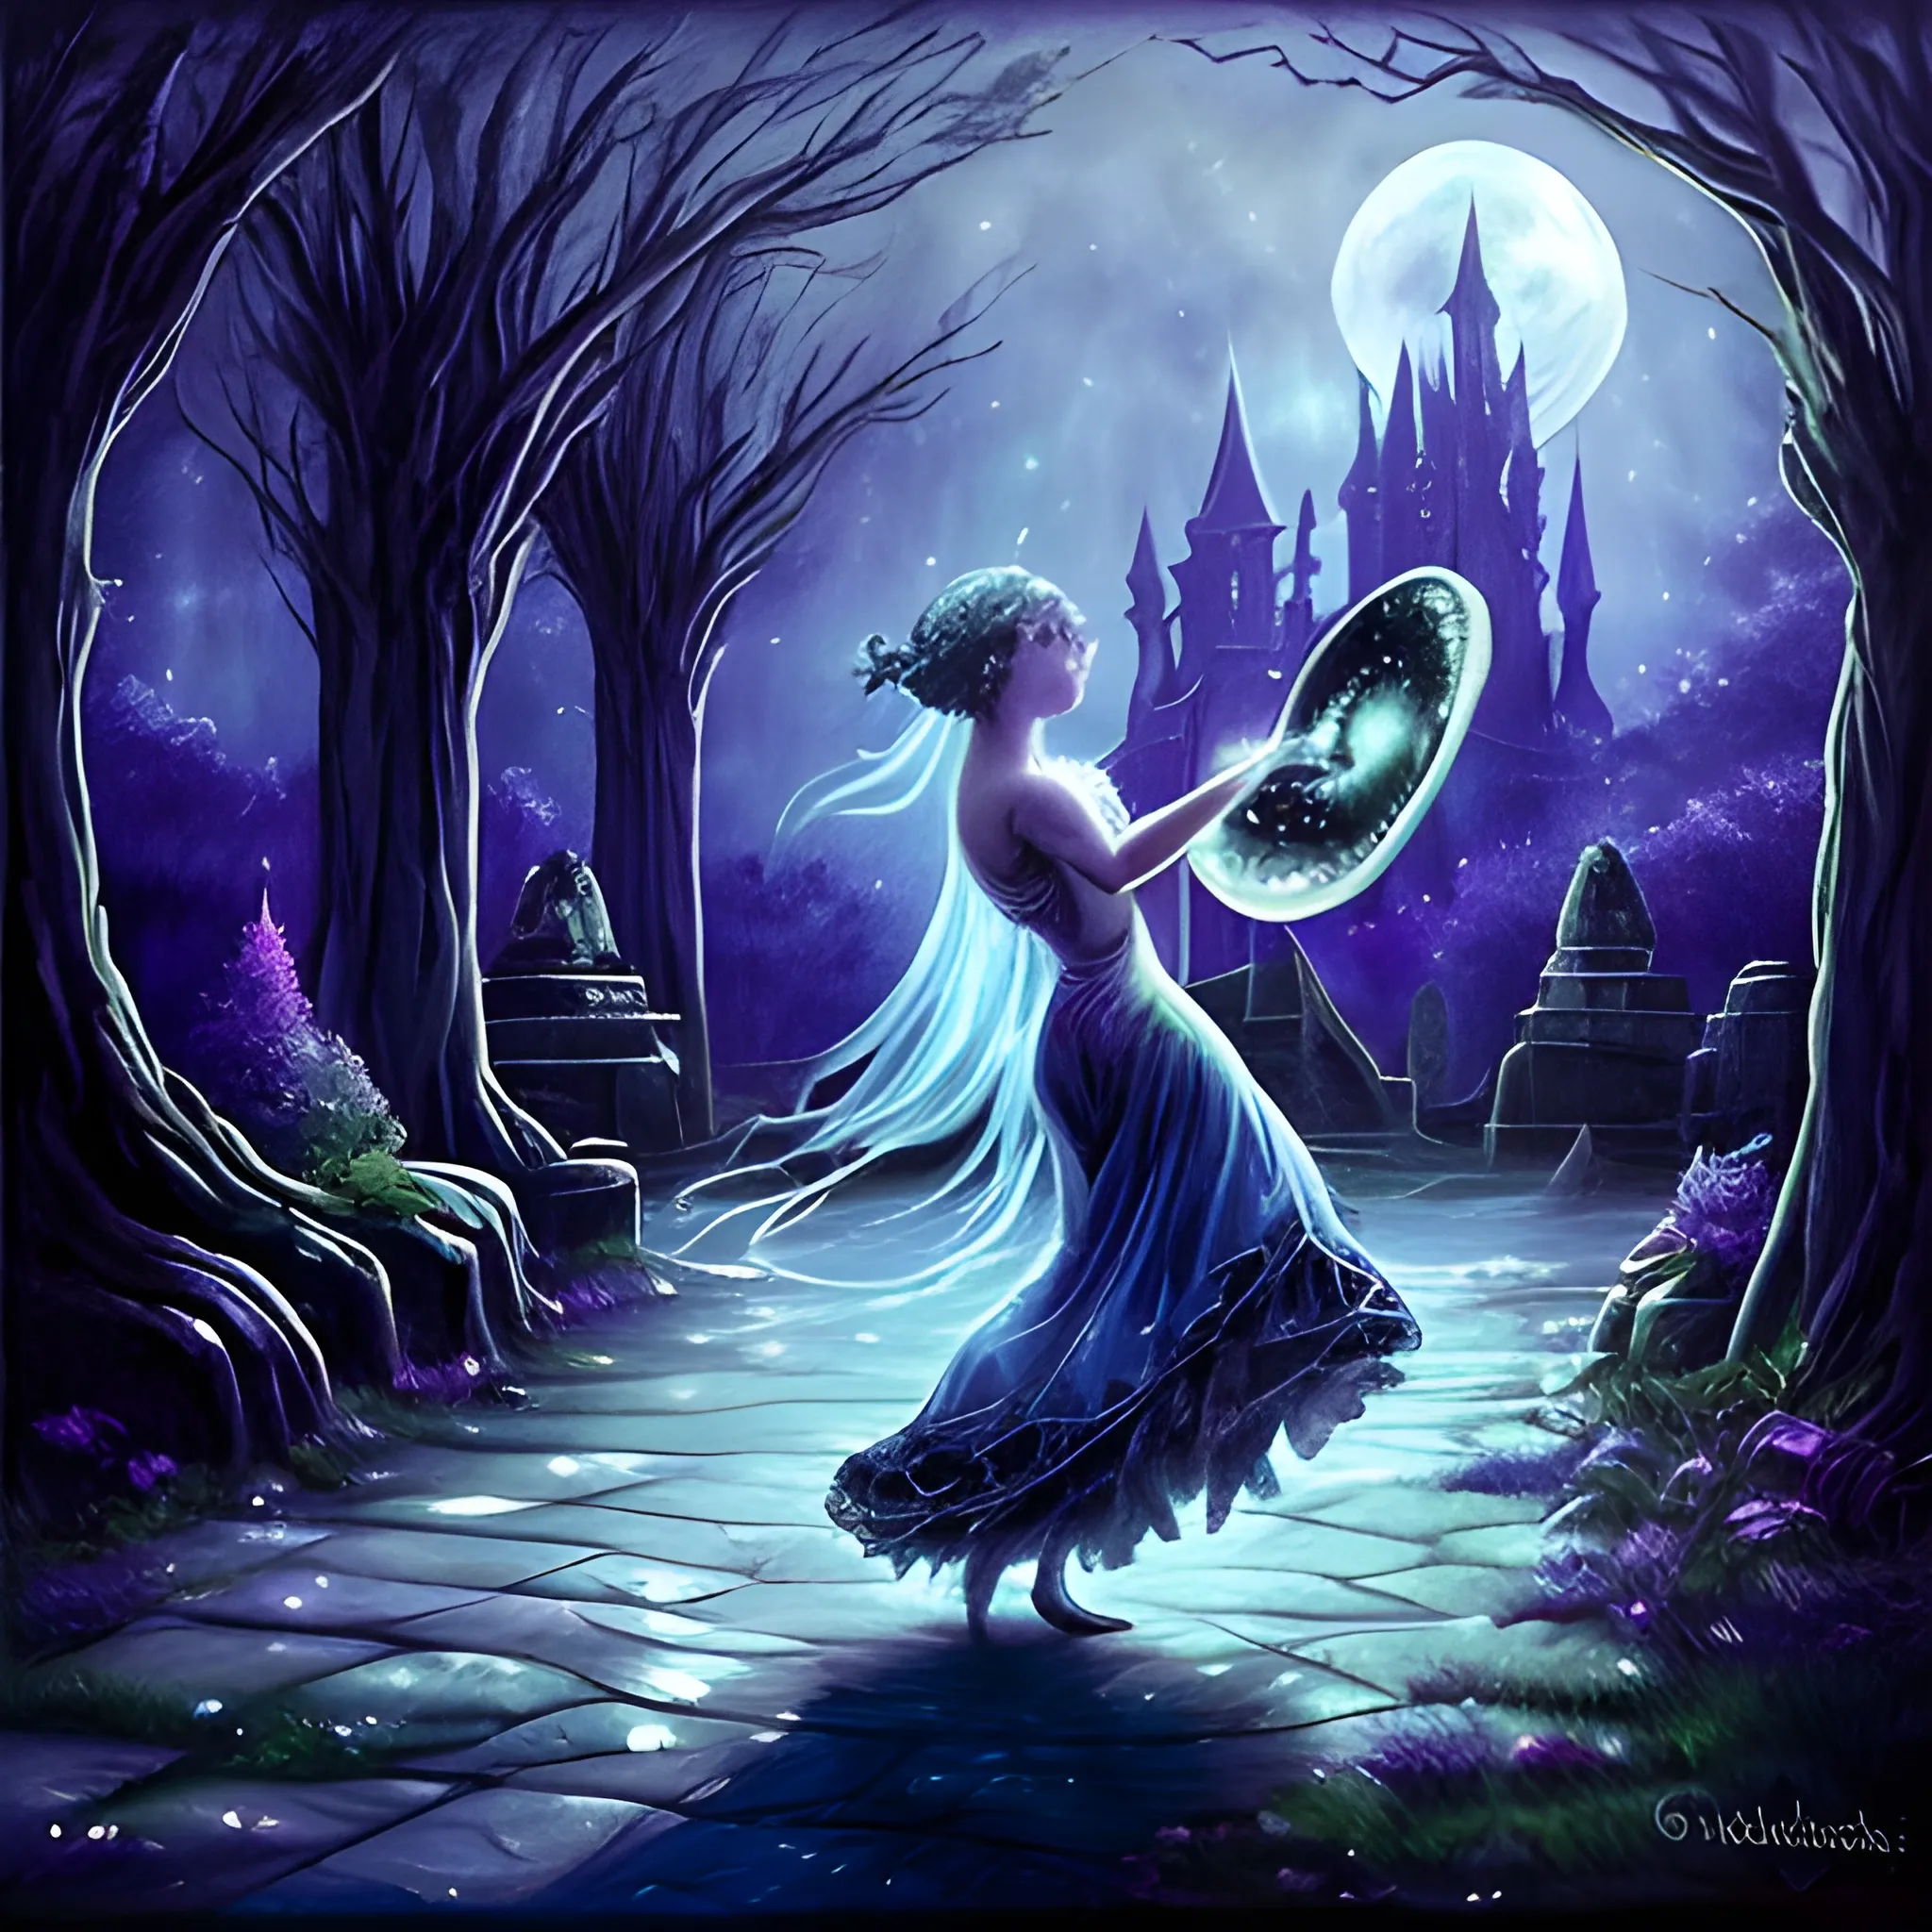 Under the pale moonlight, the whispers of ancient enchantments echo through the night. The realm of shadows stirs, awakening mystical creatures that dance in rhythm to the ethereal beats of the drums, Water Color